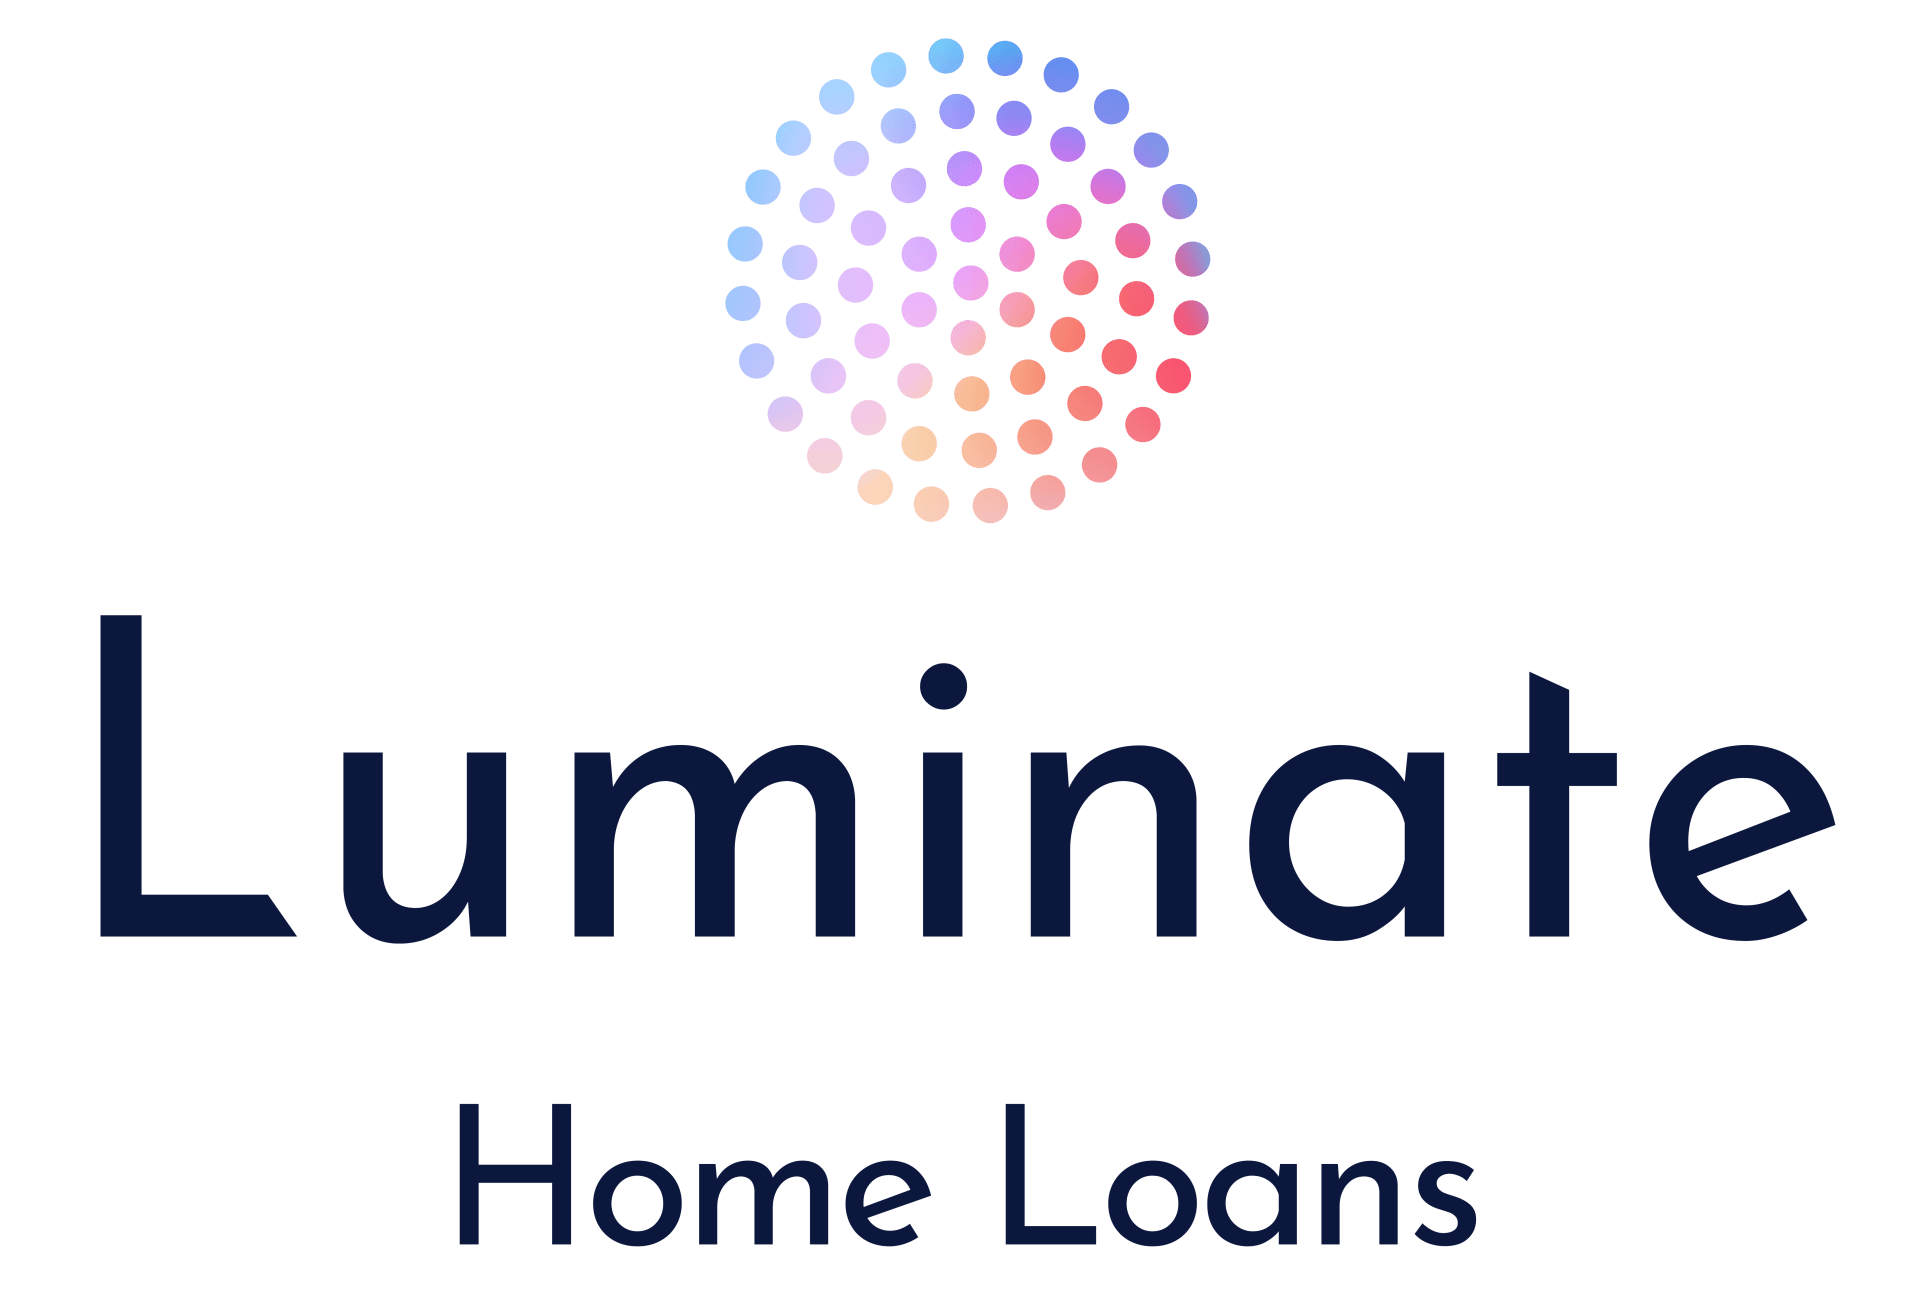 A logo for luminate home loans with a circle of dots on a white background.